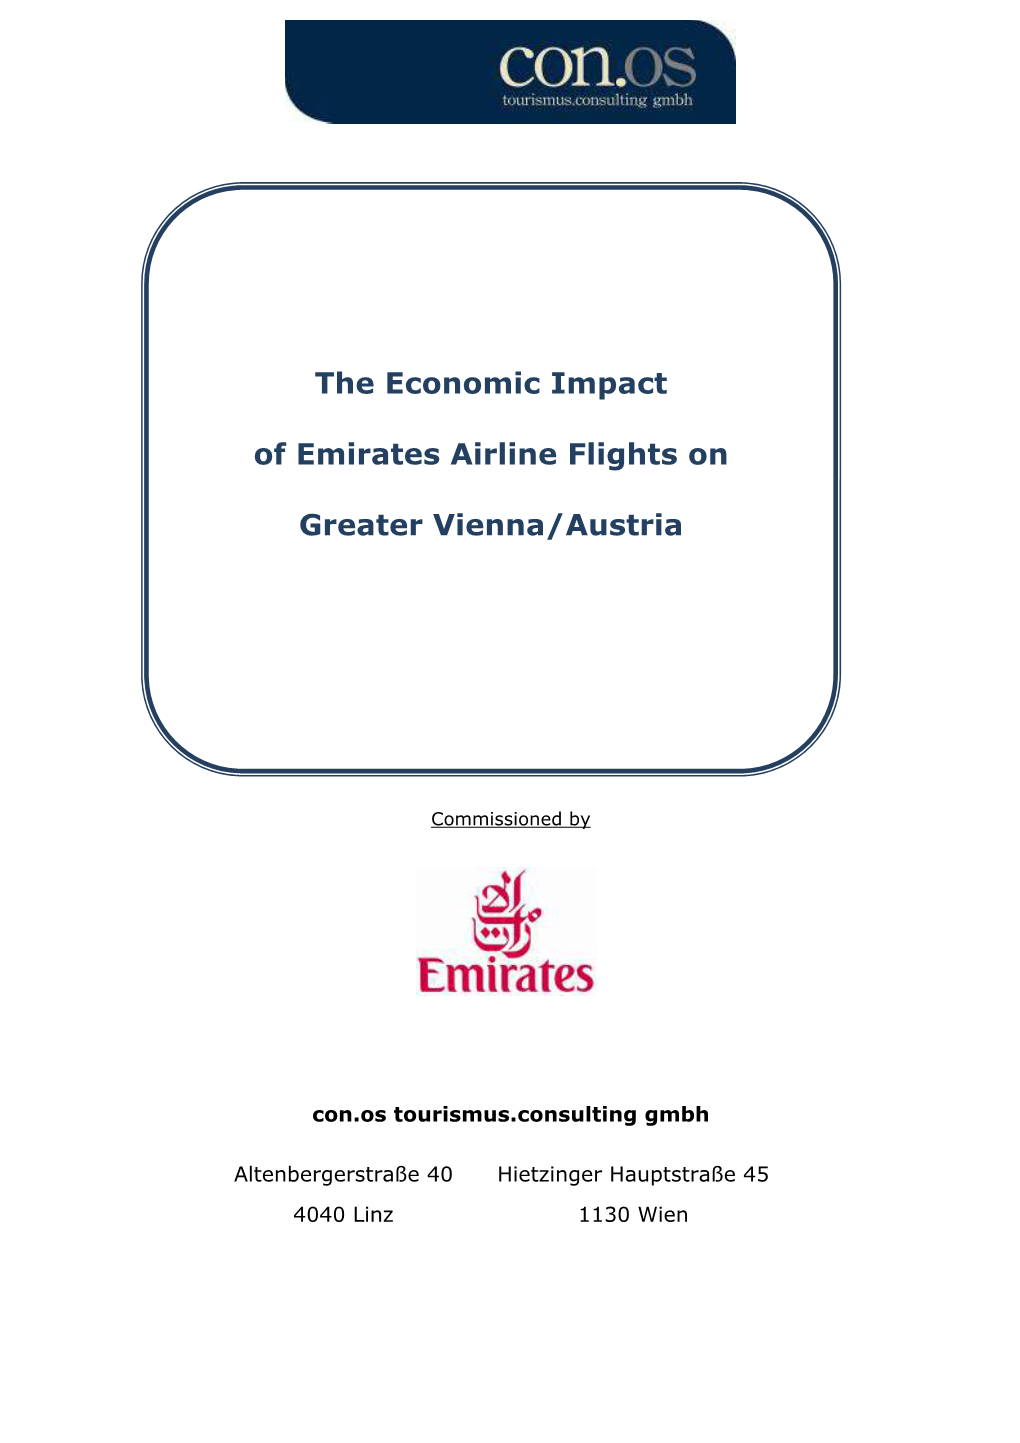 The Economic Impact of Emirates Airline Flights on Greater Vienna